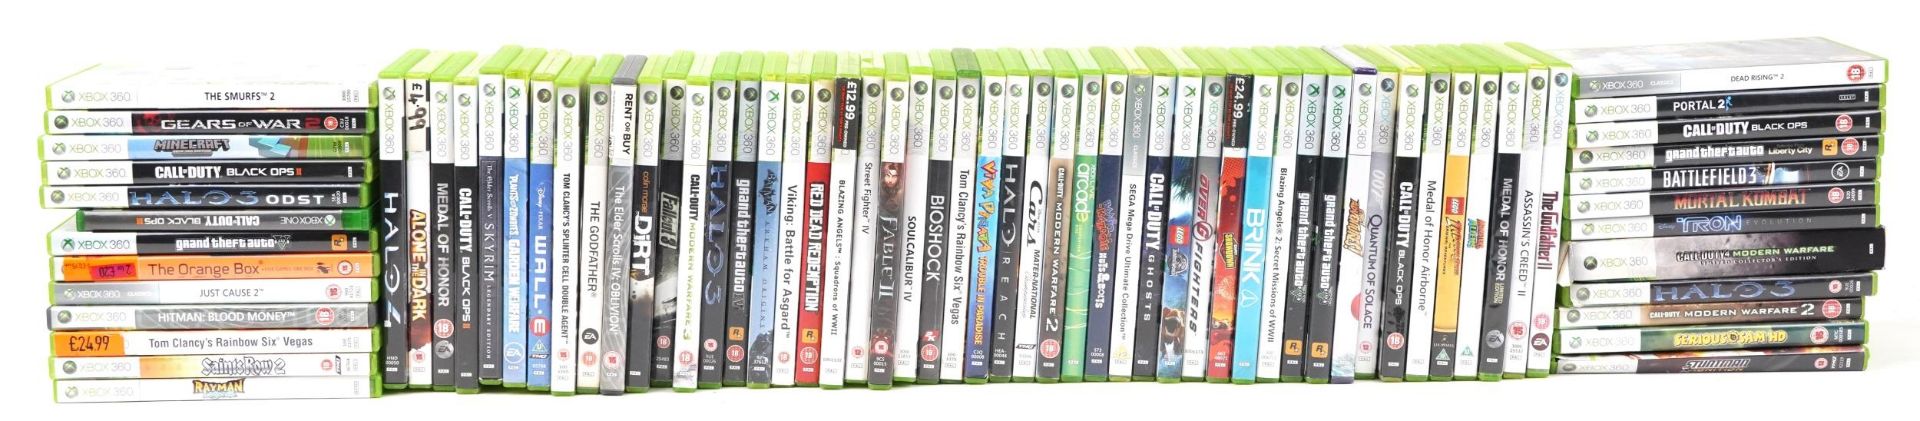 Large collection of Xbox 360 games